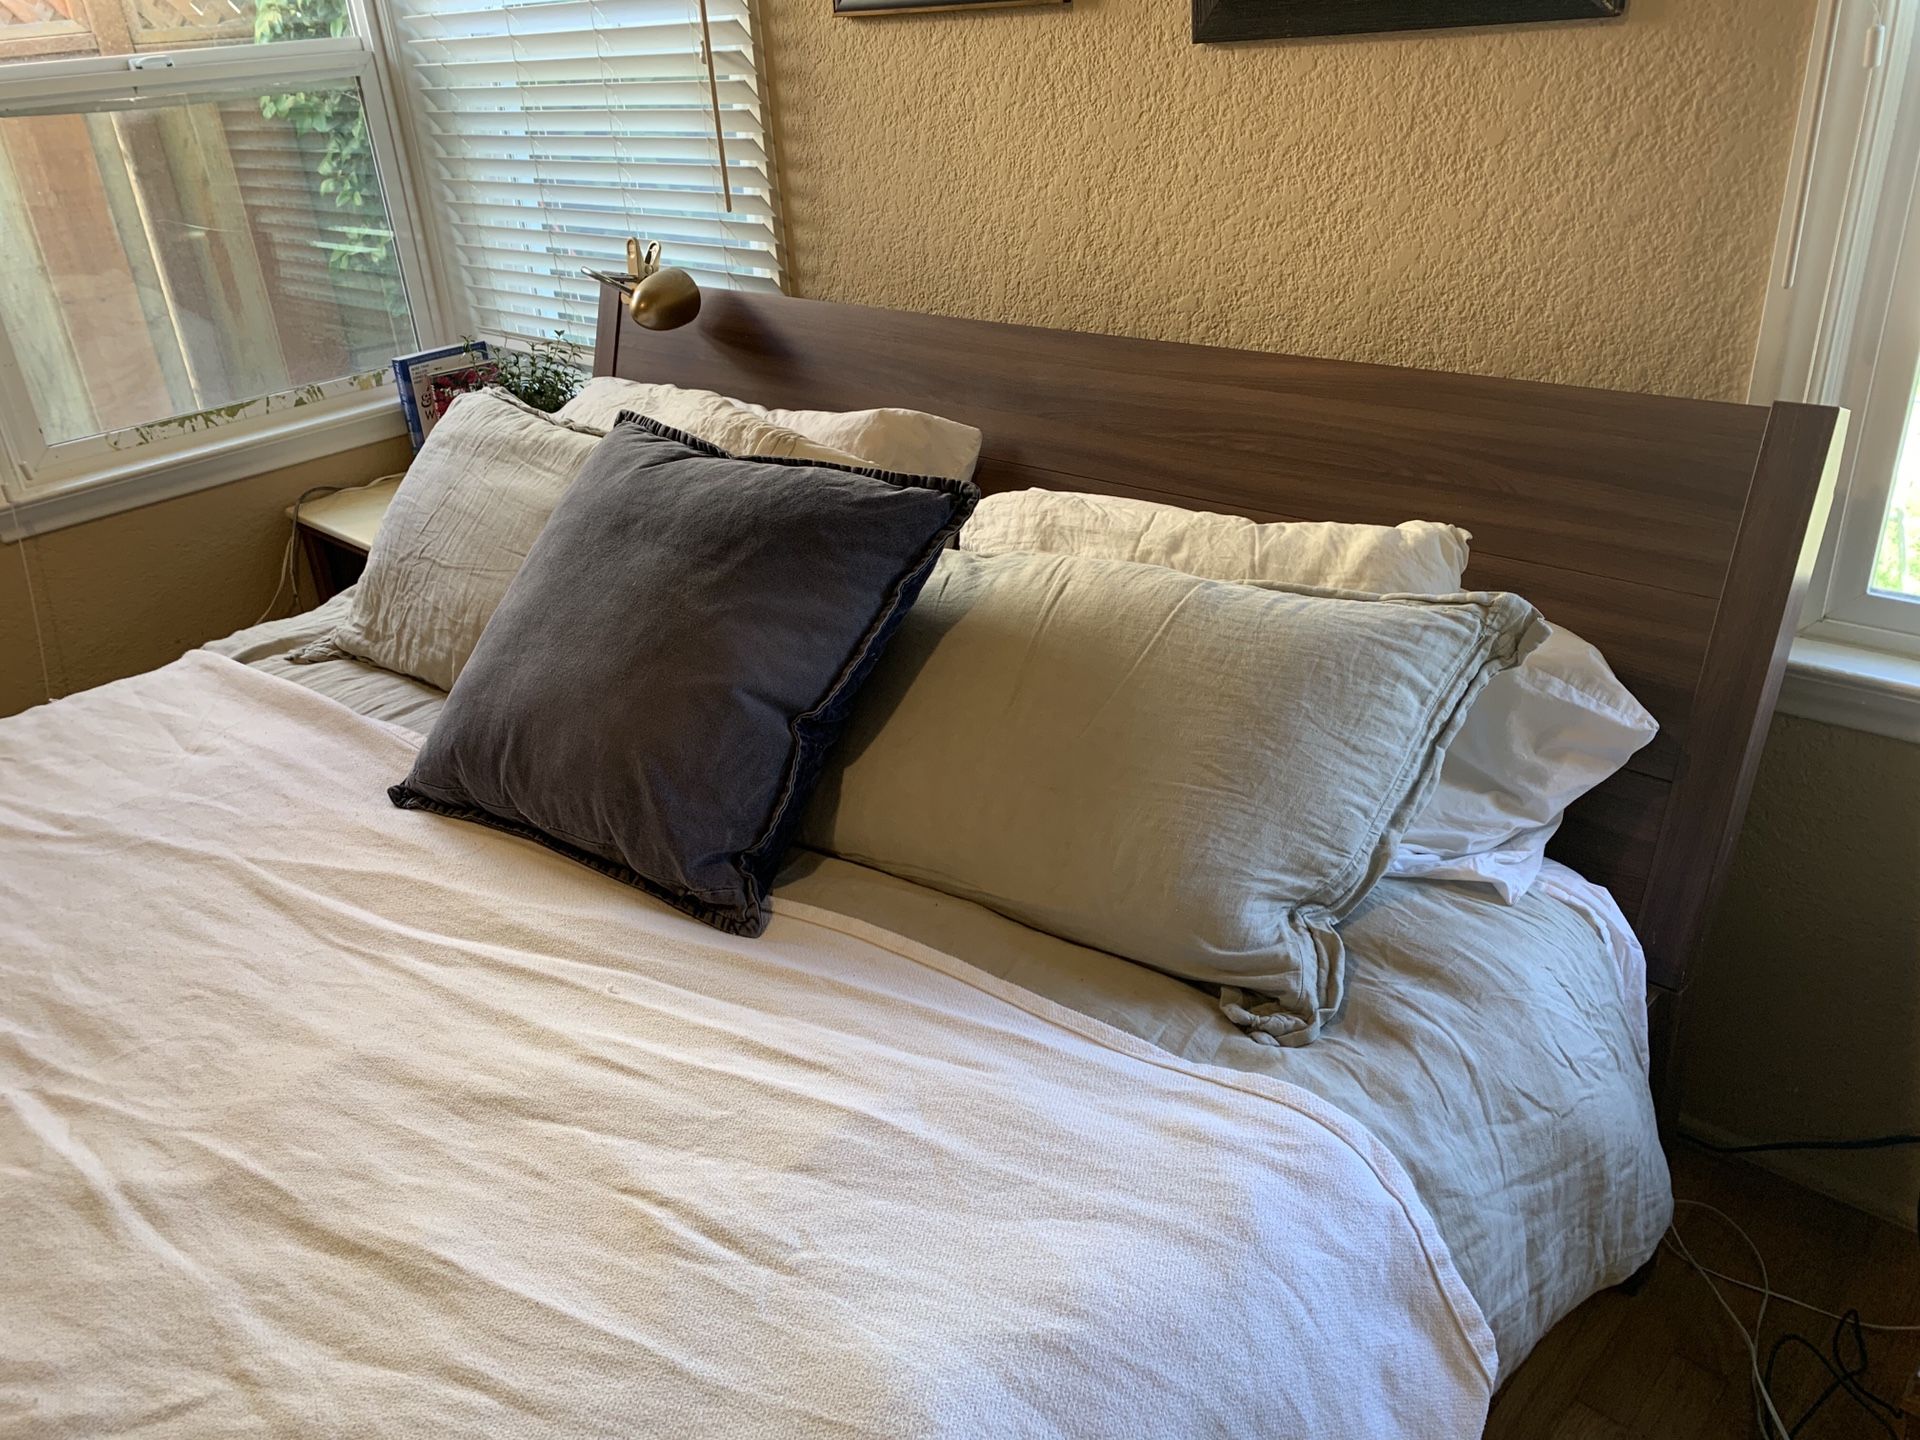 Wood ikea king size bed